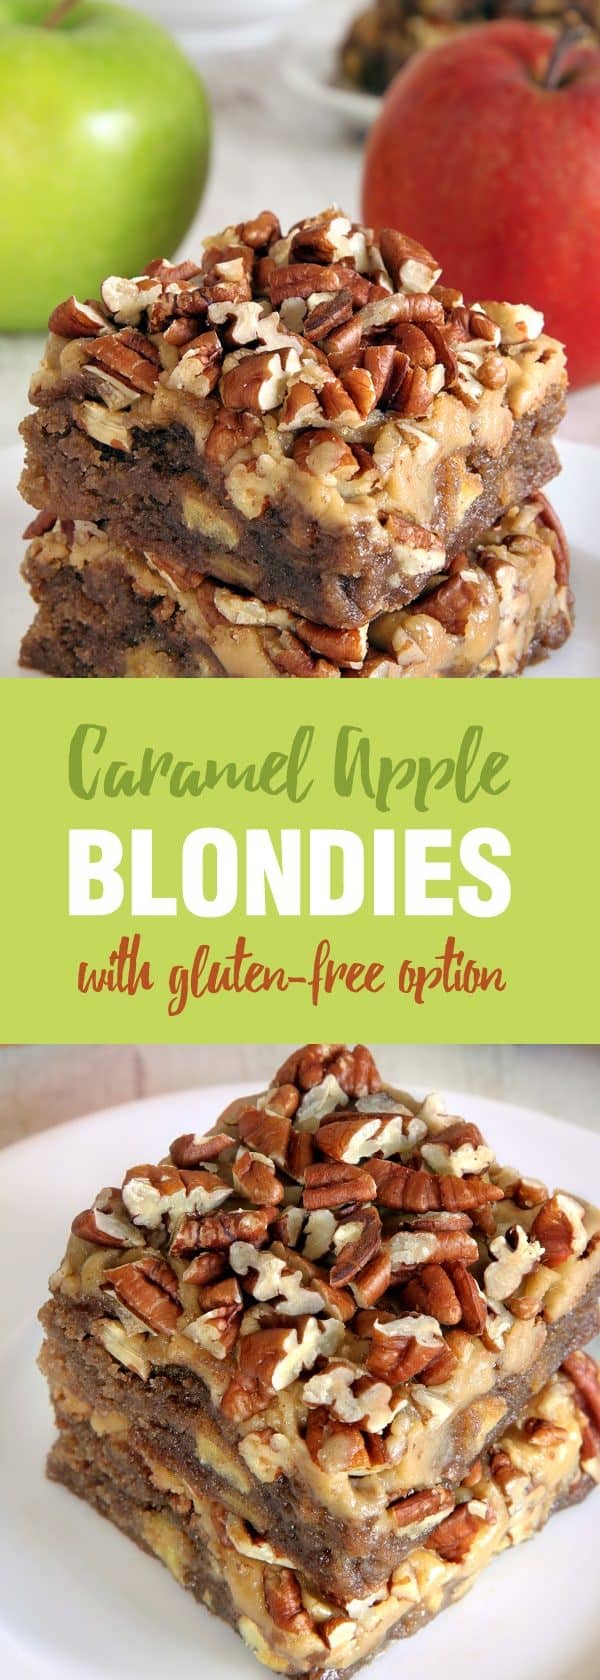 Caramel apple blondies topped with an easy caramel frosting are the perfect fall treat. Recipe contains a gluten-free option.